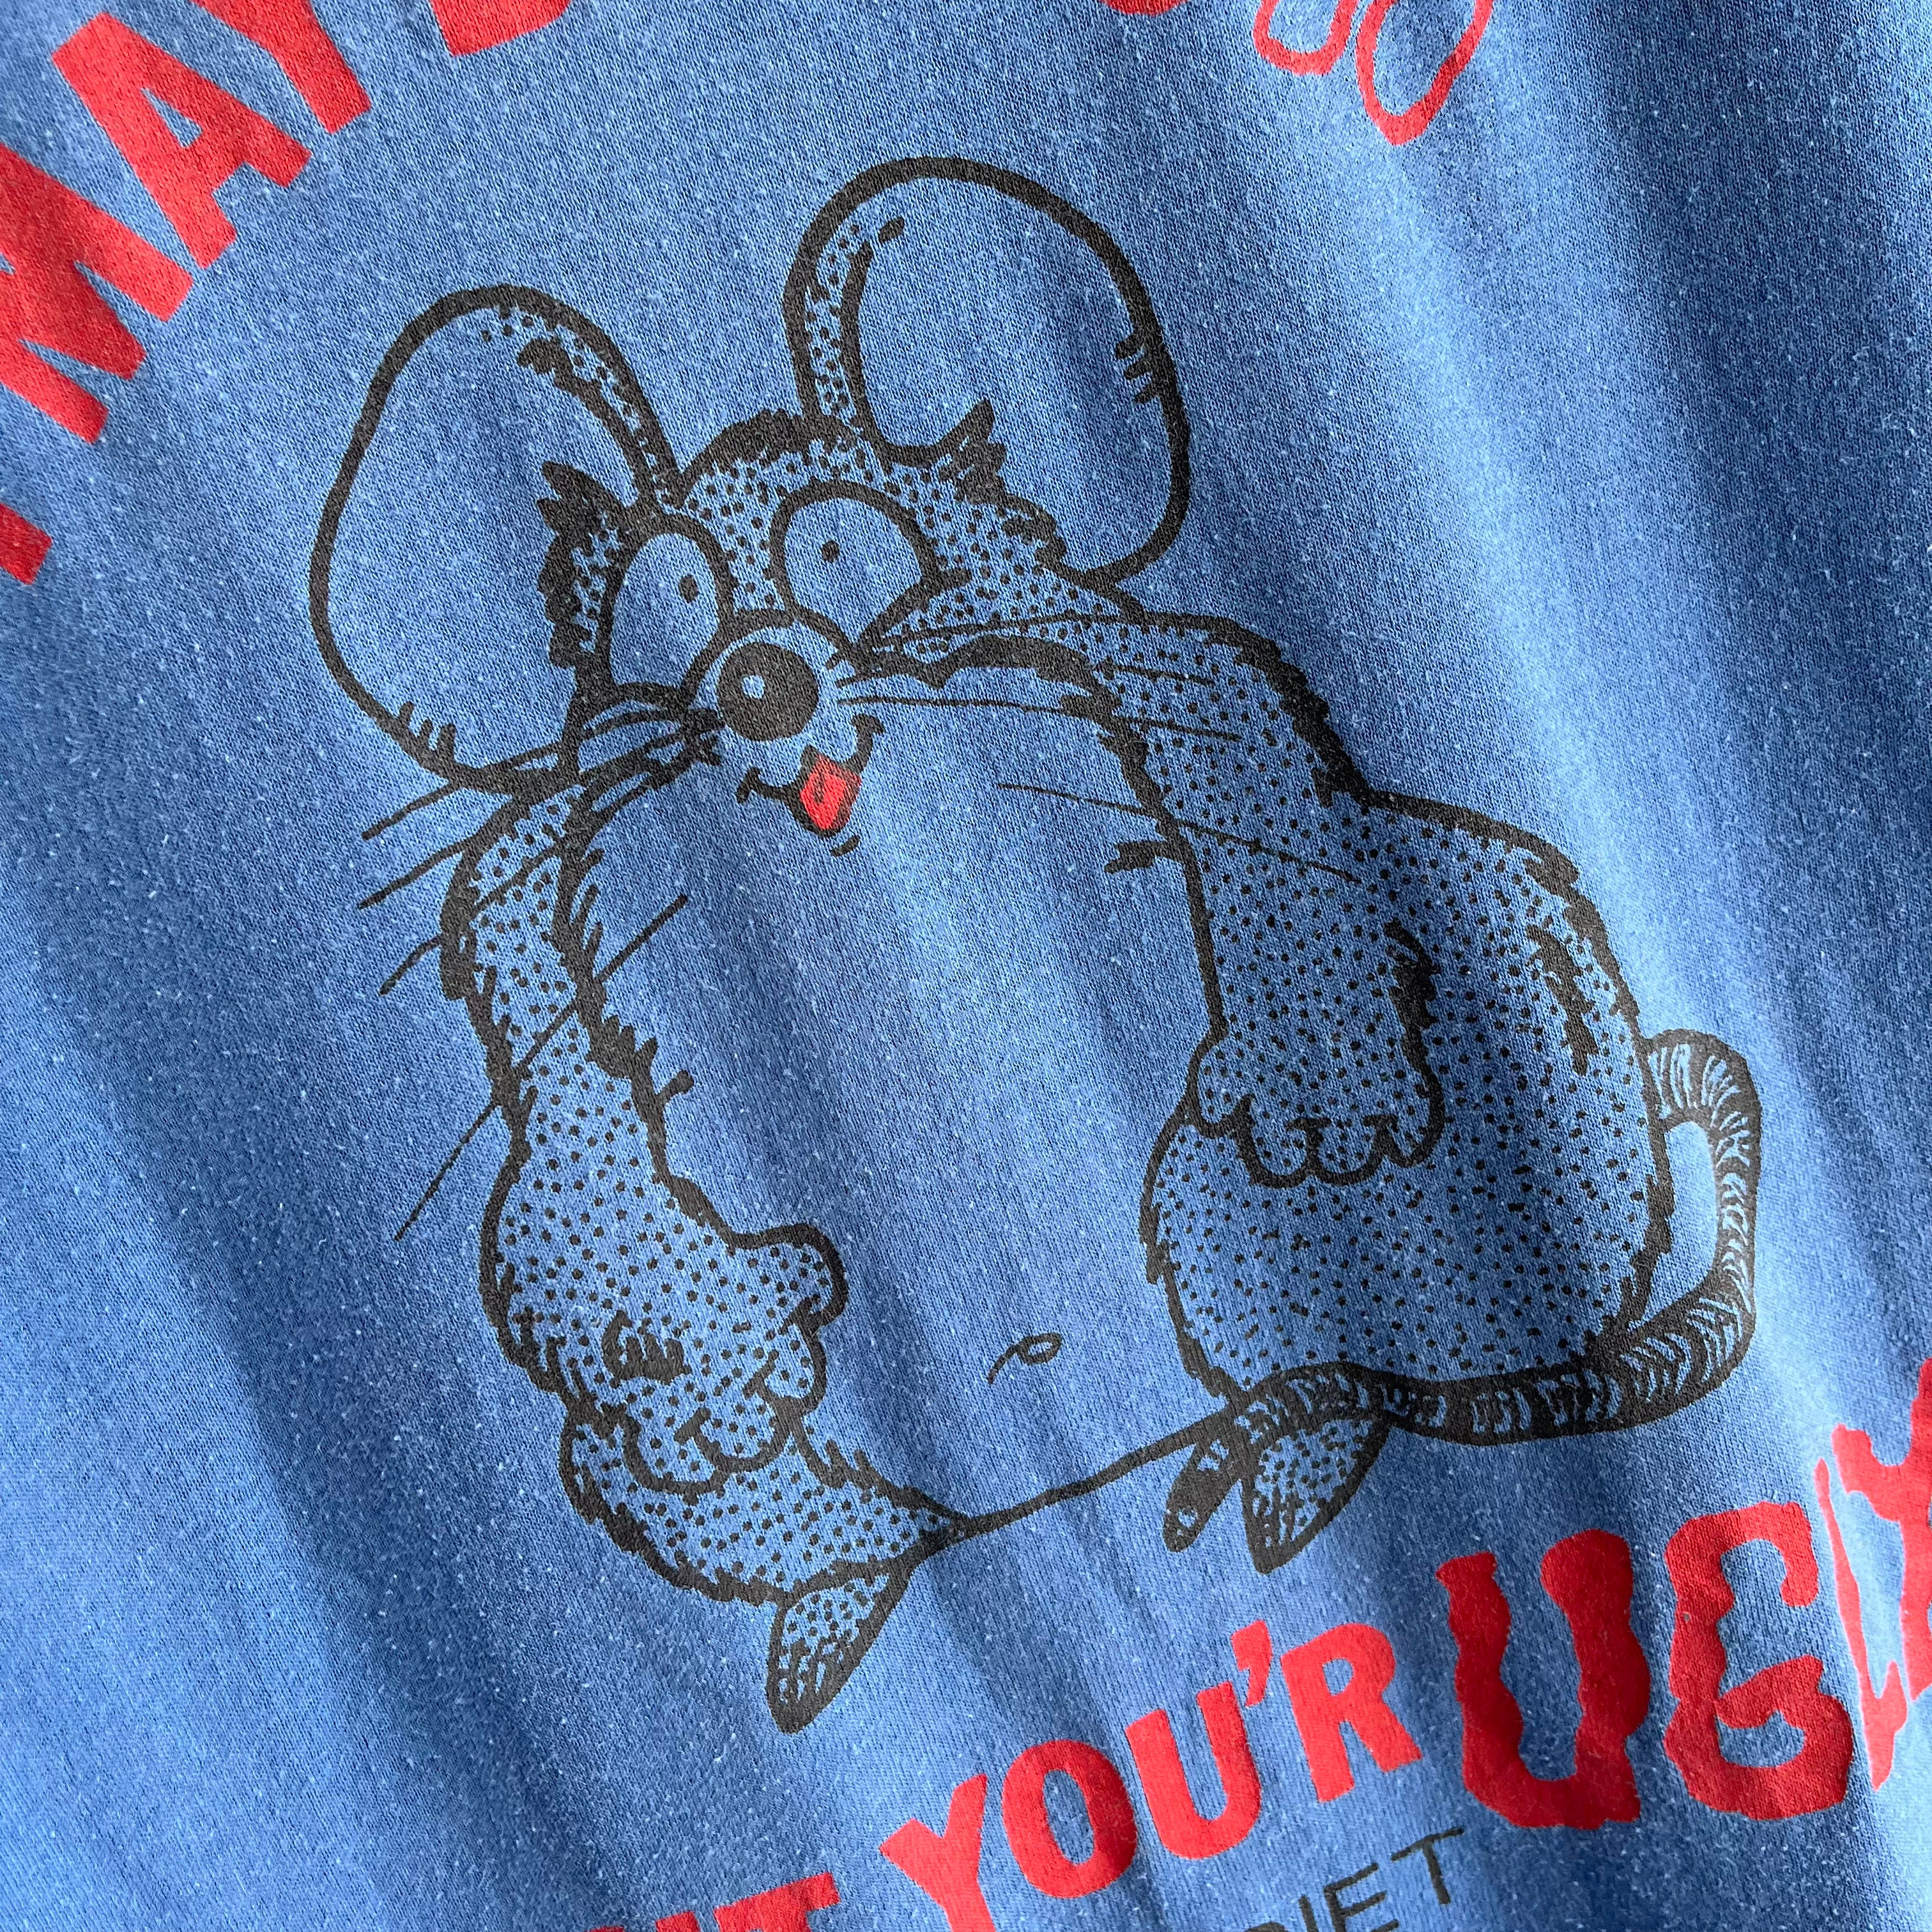 1980s Horribly Mean and Awful T-Shirt That No One Should Buy